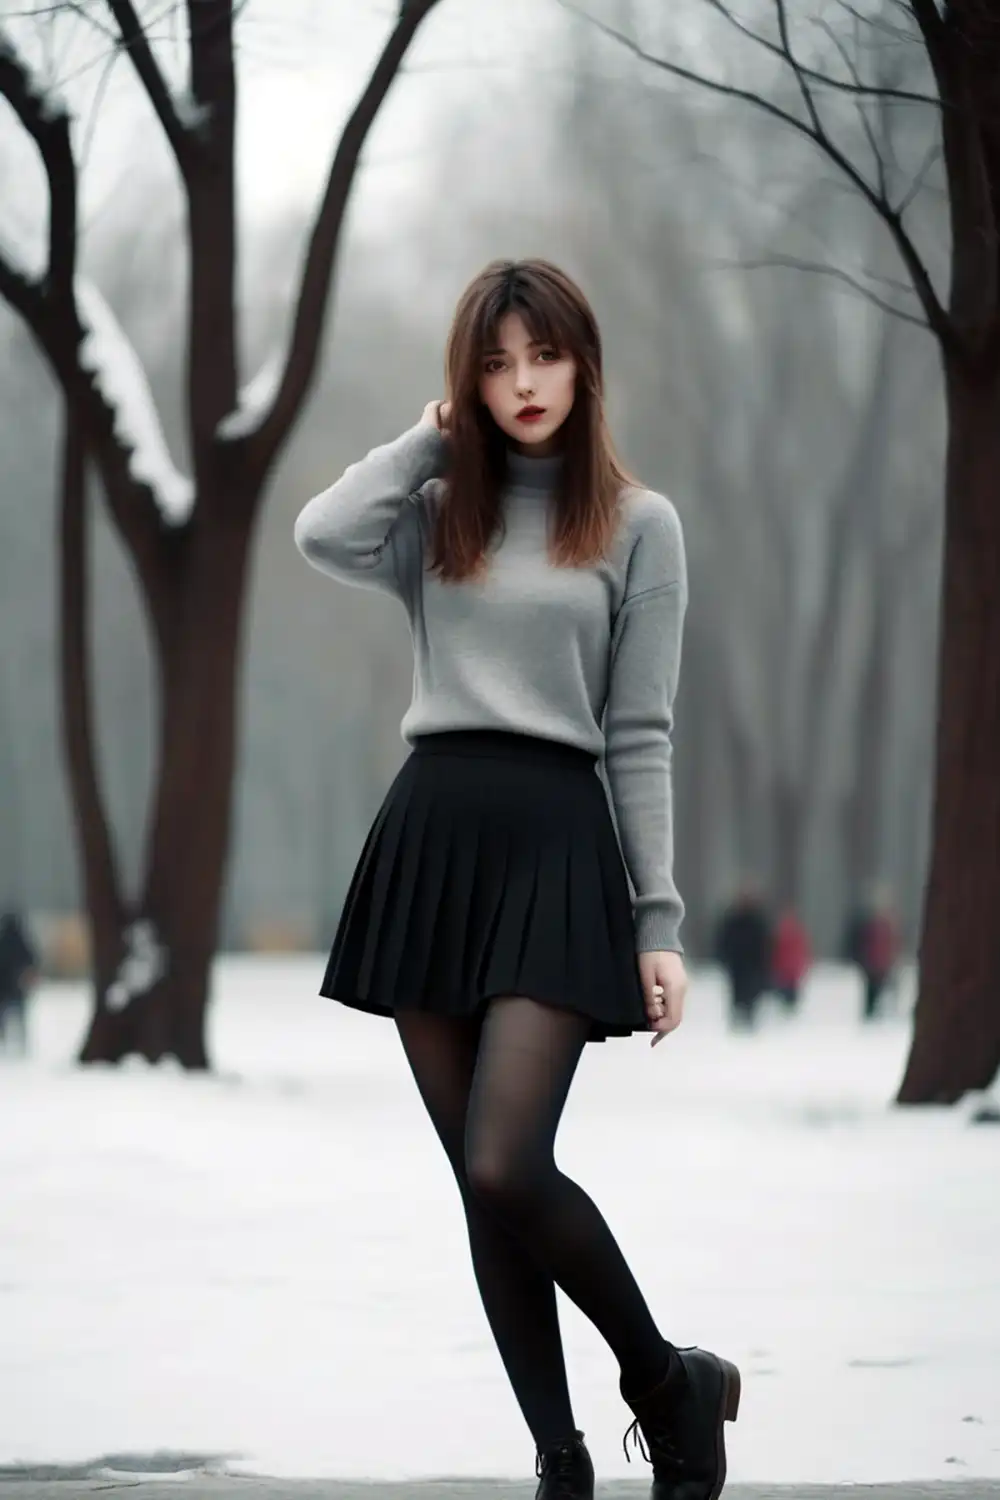 Girl wearing Opaque tights with black skirt in winter